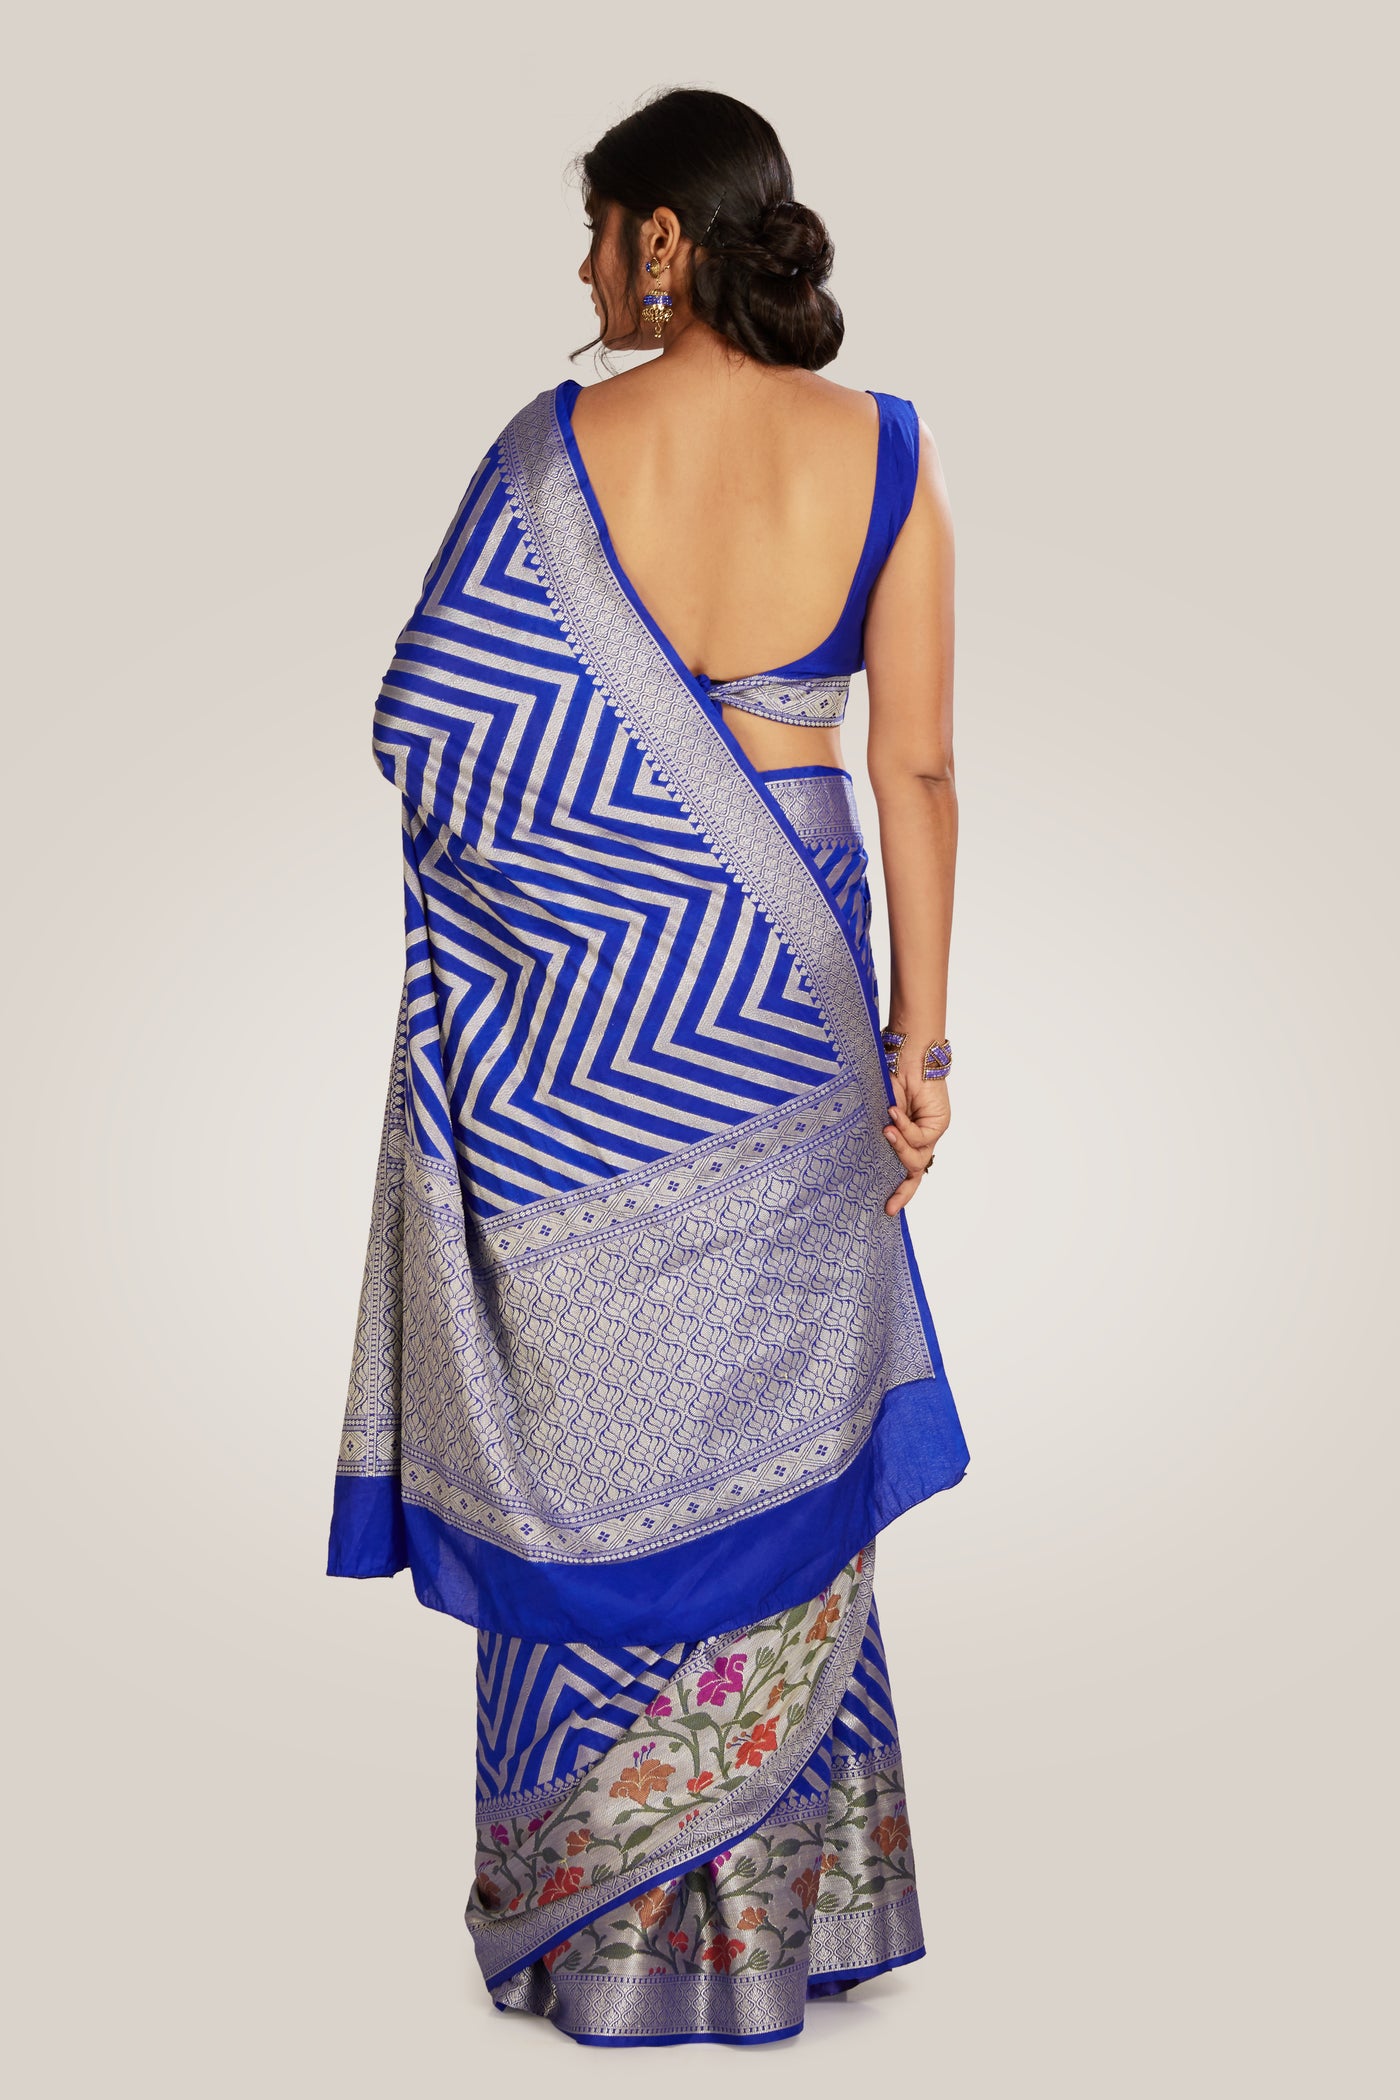 Zig Zag Saree - Indian Clothing in Denver, CO, Aurora, CO, Boulder, CO, Fort Collins, CO, Colorado Springs, CO, Parker, CO, Highlands Ranch, CO, Cherry Creek, CO, Centennial, CO, and Longmont, CO. Nationwide shipping USA - India Fashion X